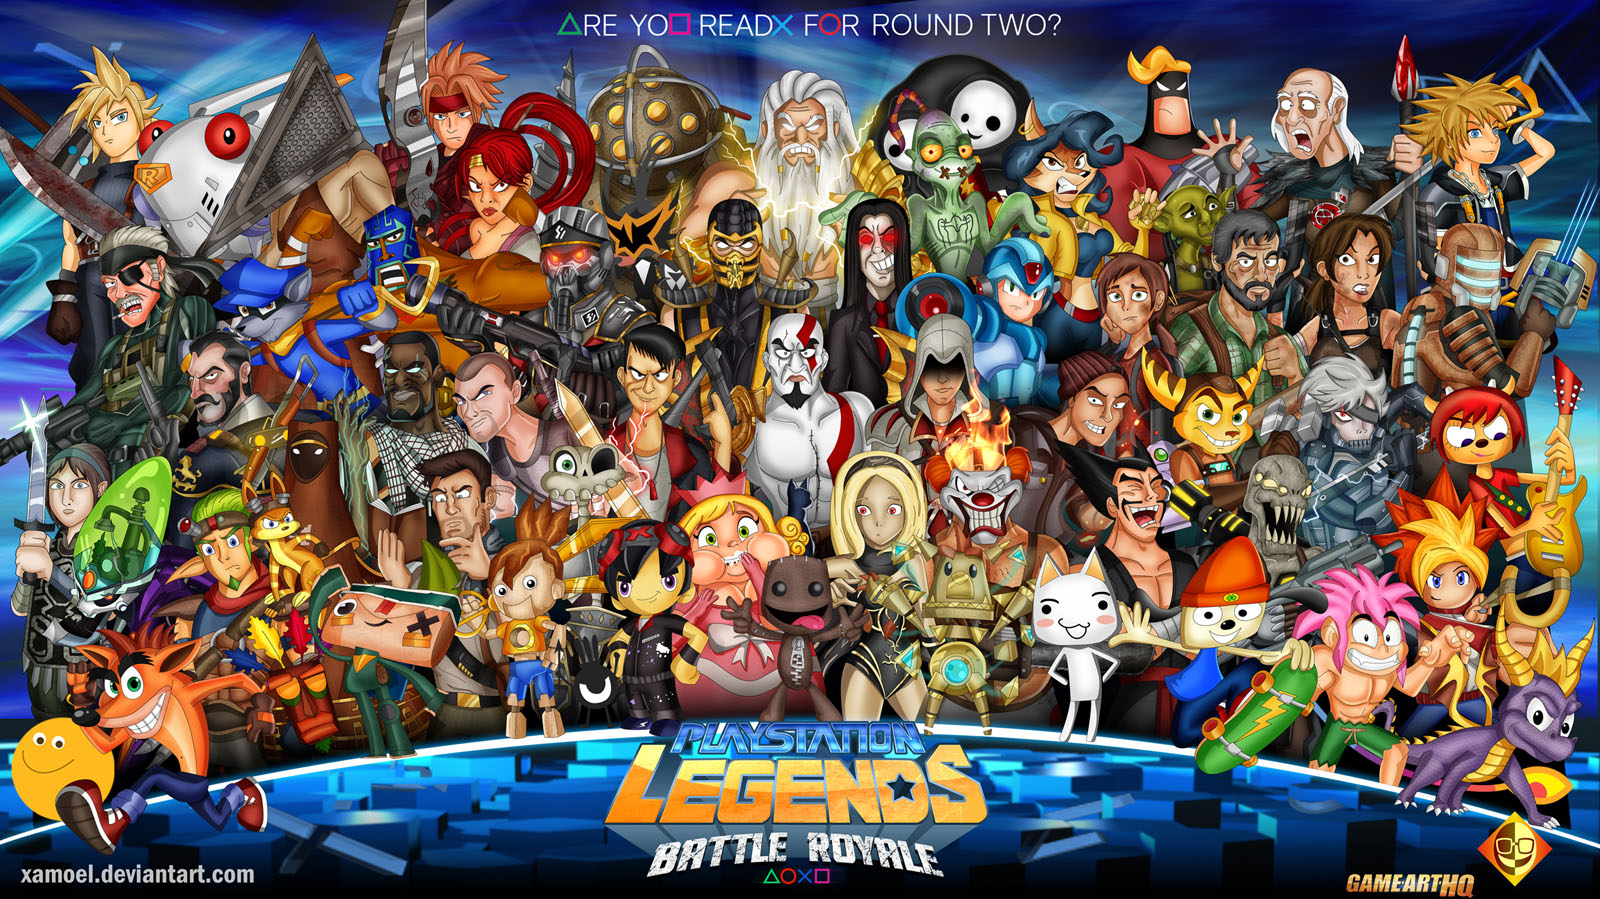 playstation all stars all characters